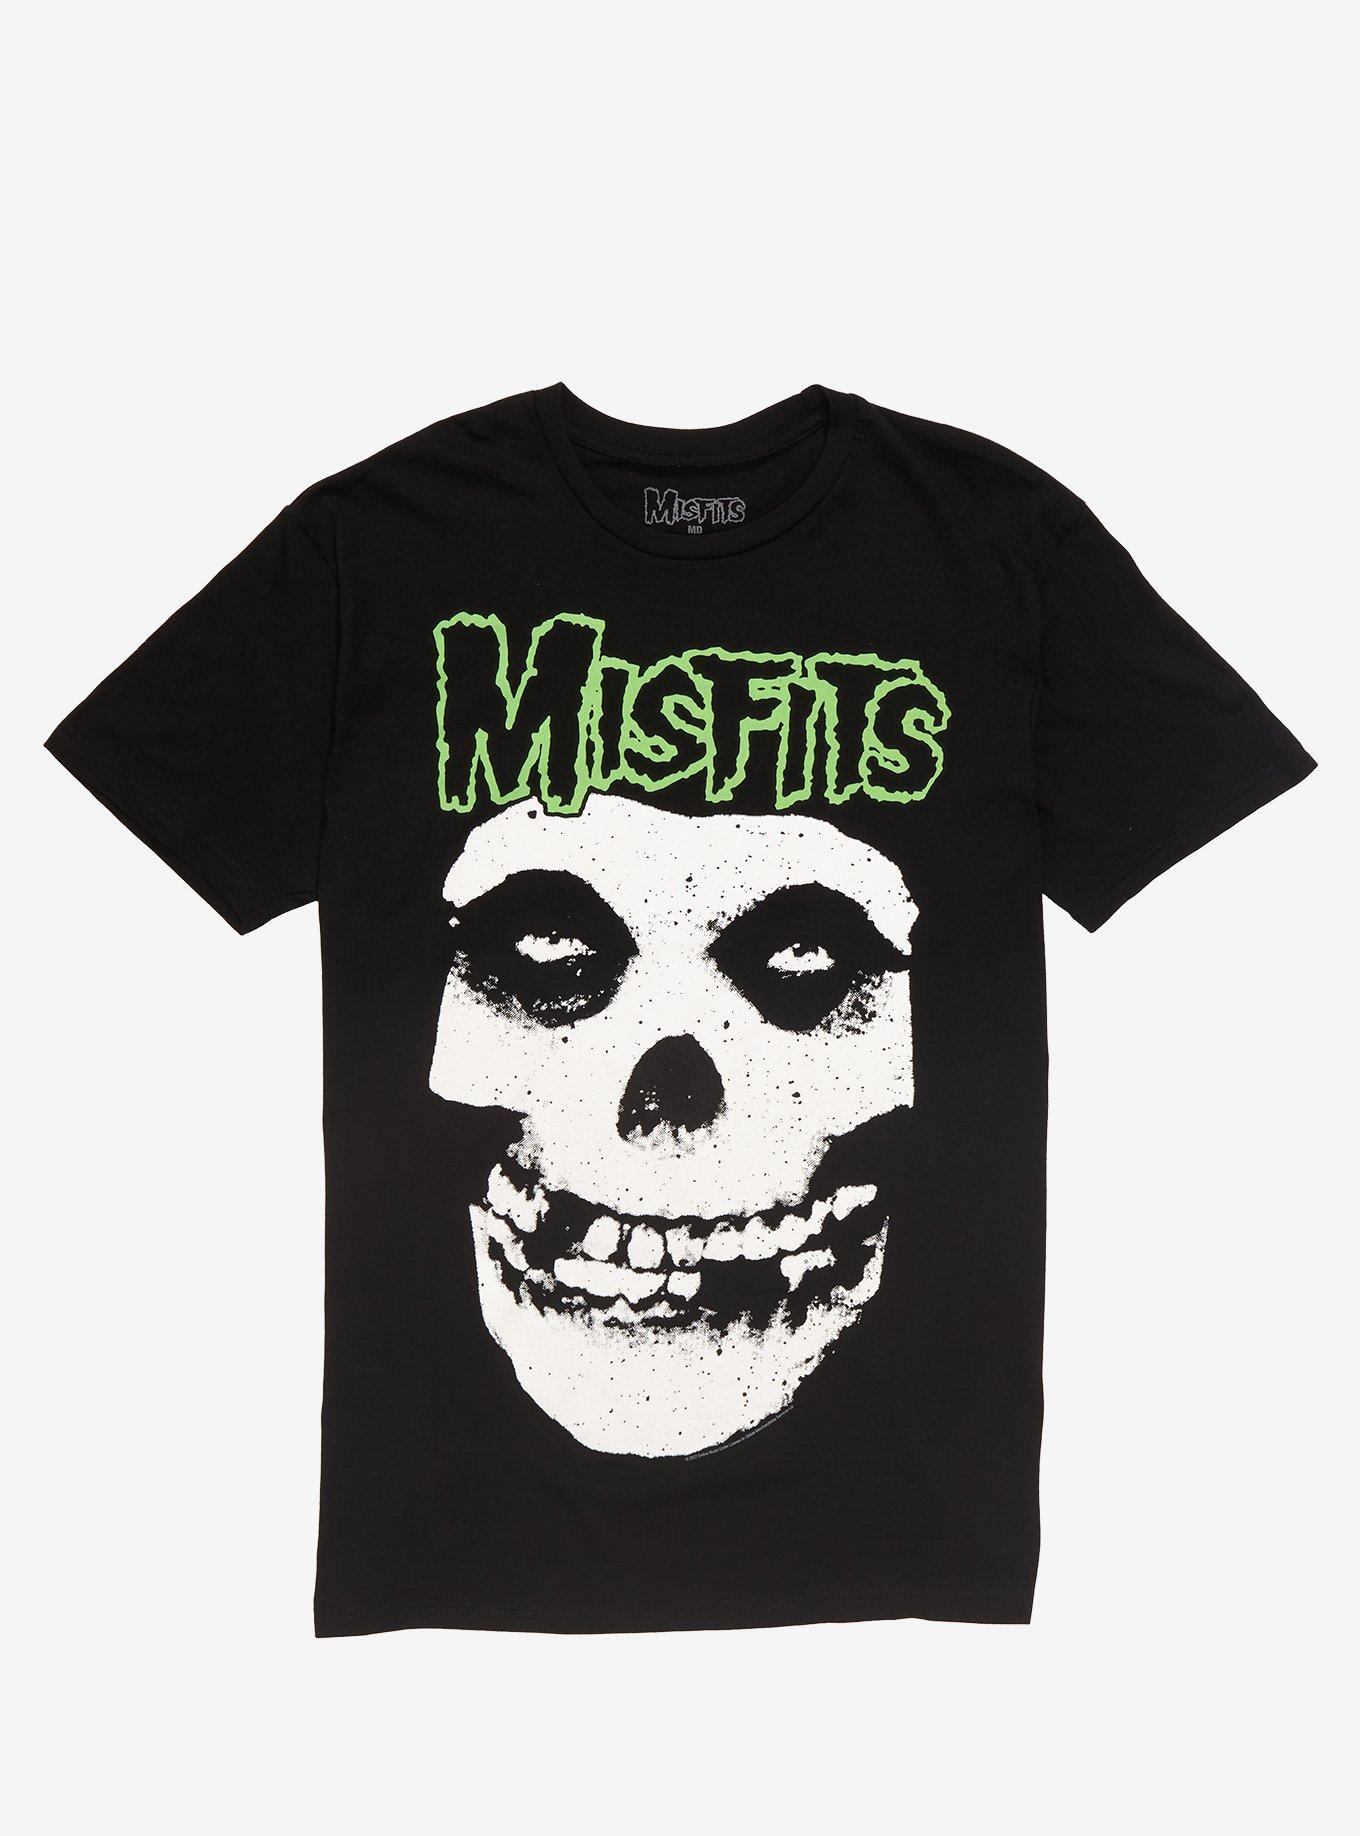 The Misfits - Mens Astro Zombies Baseball T-Shirt in Heather Grey/Black